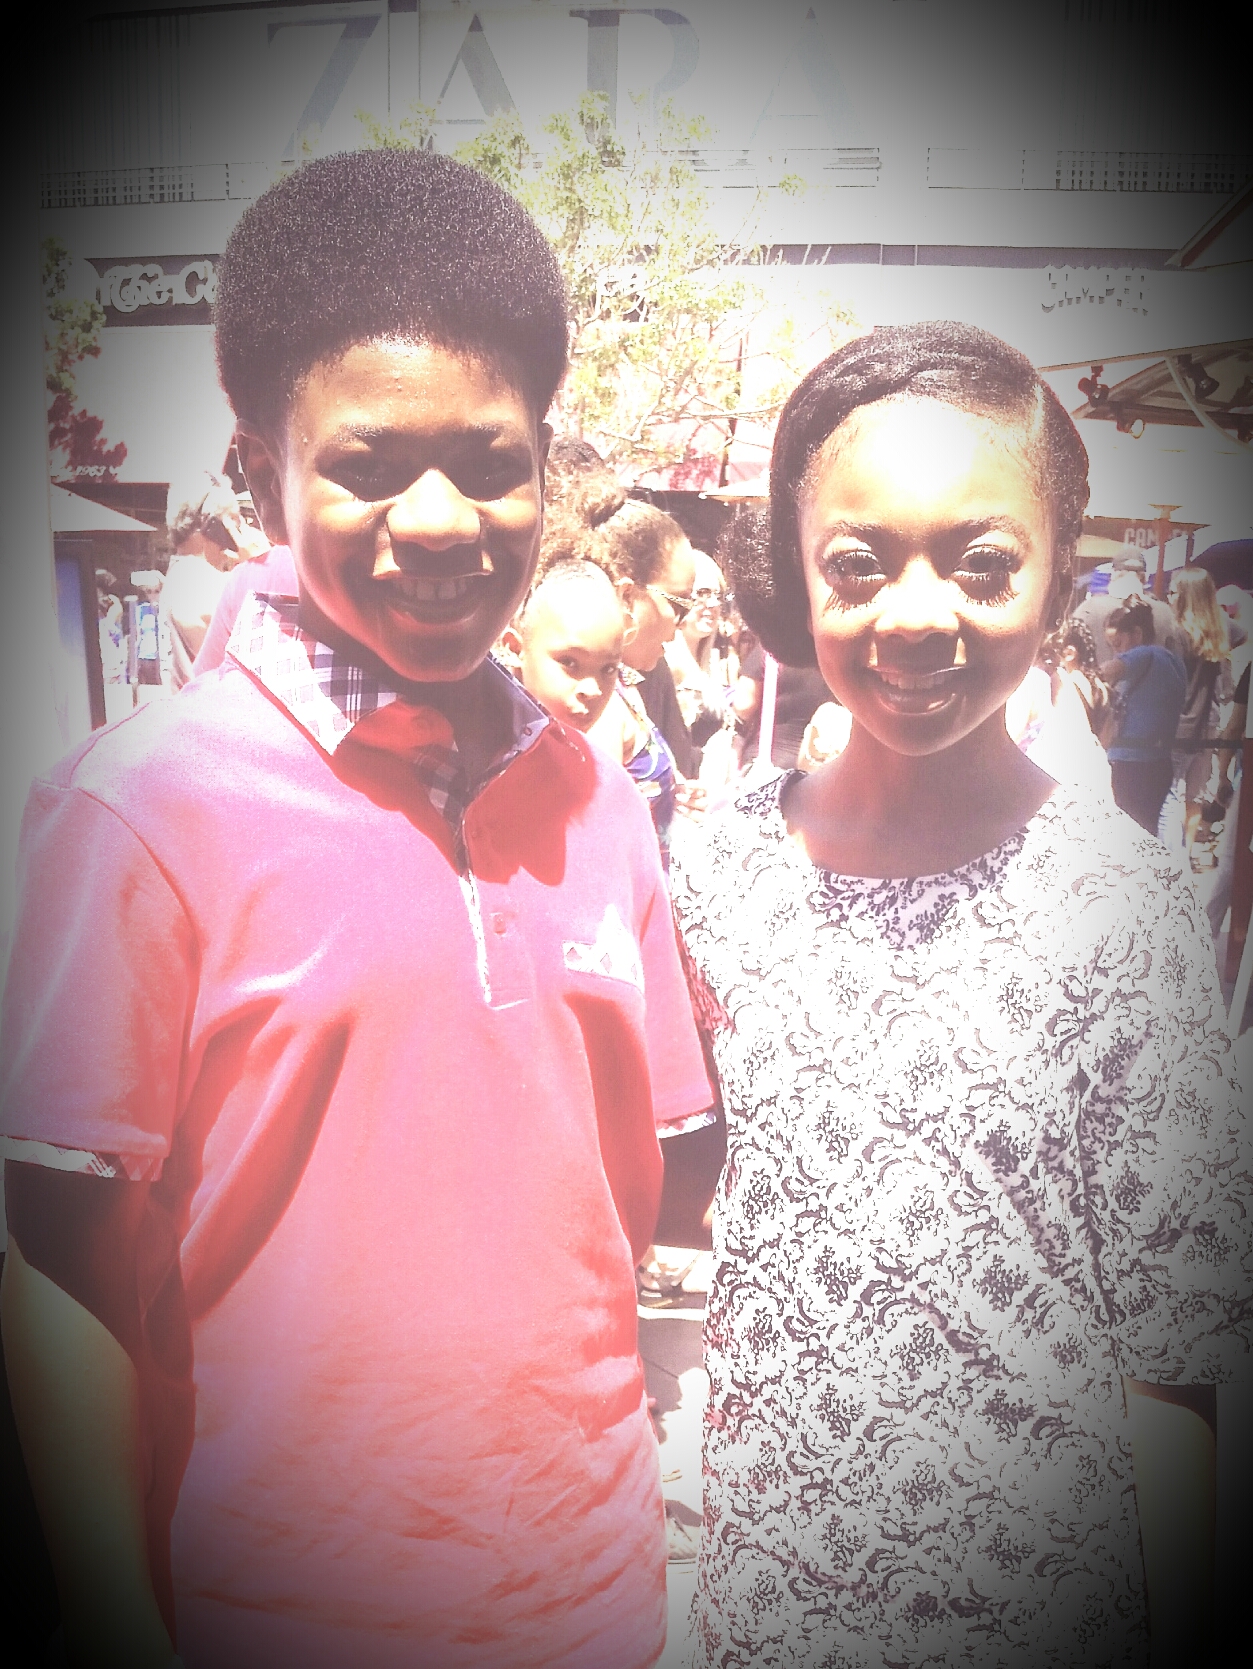 2 Of The Best Skai Jackson & I Giving Back And Supporting A Charity Event By Ronald McDonald.